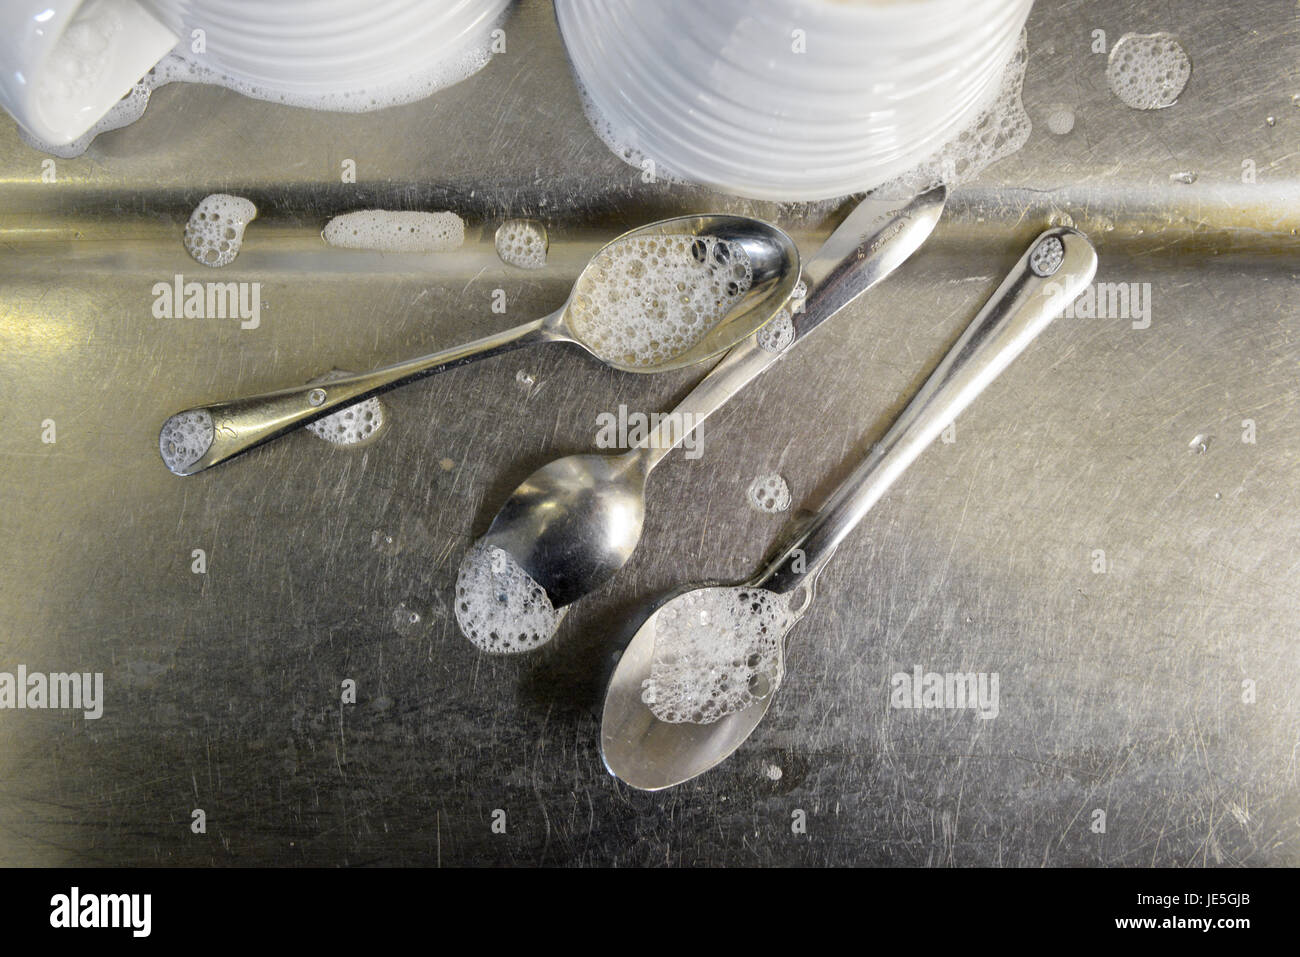 https://c8.alamy.com/comp/JE5GJB/teaspoons-with-soap-bubbles-and-white-cups-on-stainless-steel-draining-JE5GJB.jpg